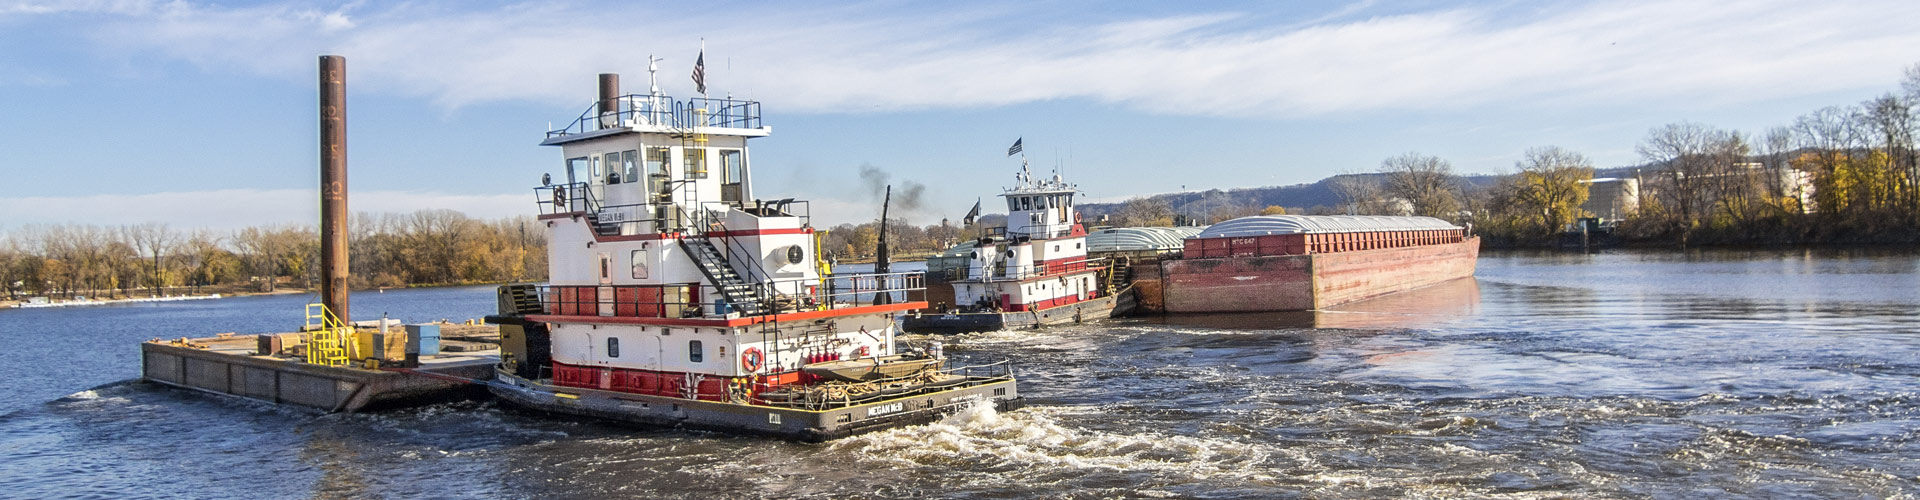 switching and fleeting, fleeting, barge transportation, inland waterway services, inland river services, inland river towing, towboats, Upper Mississippi river service, barge service, harbor management